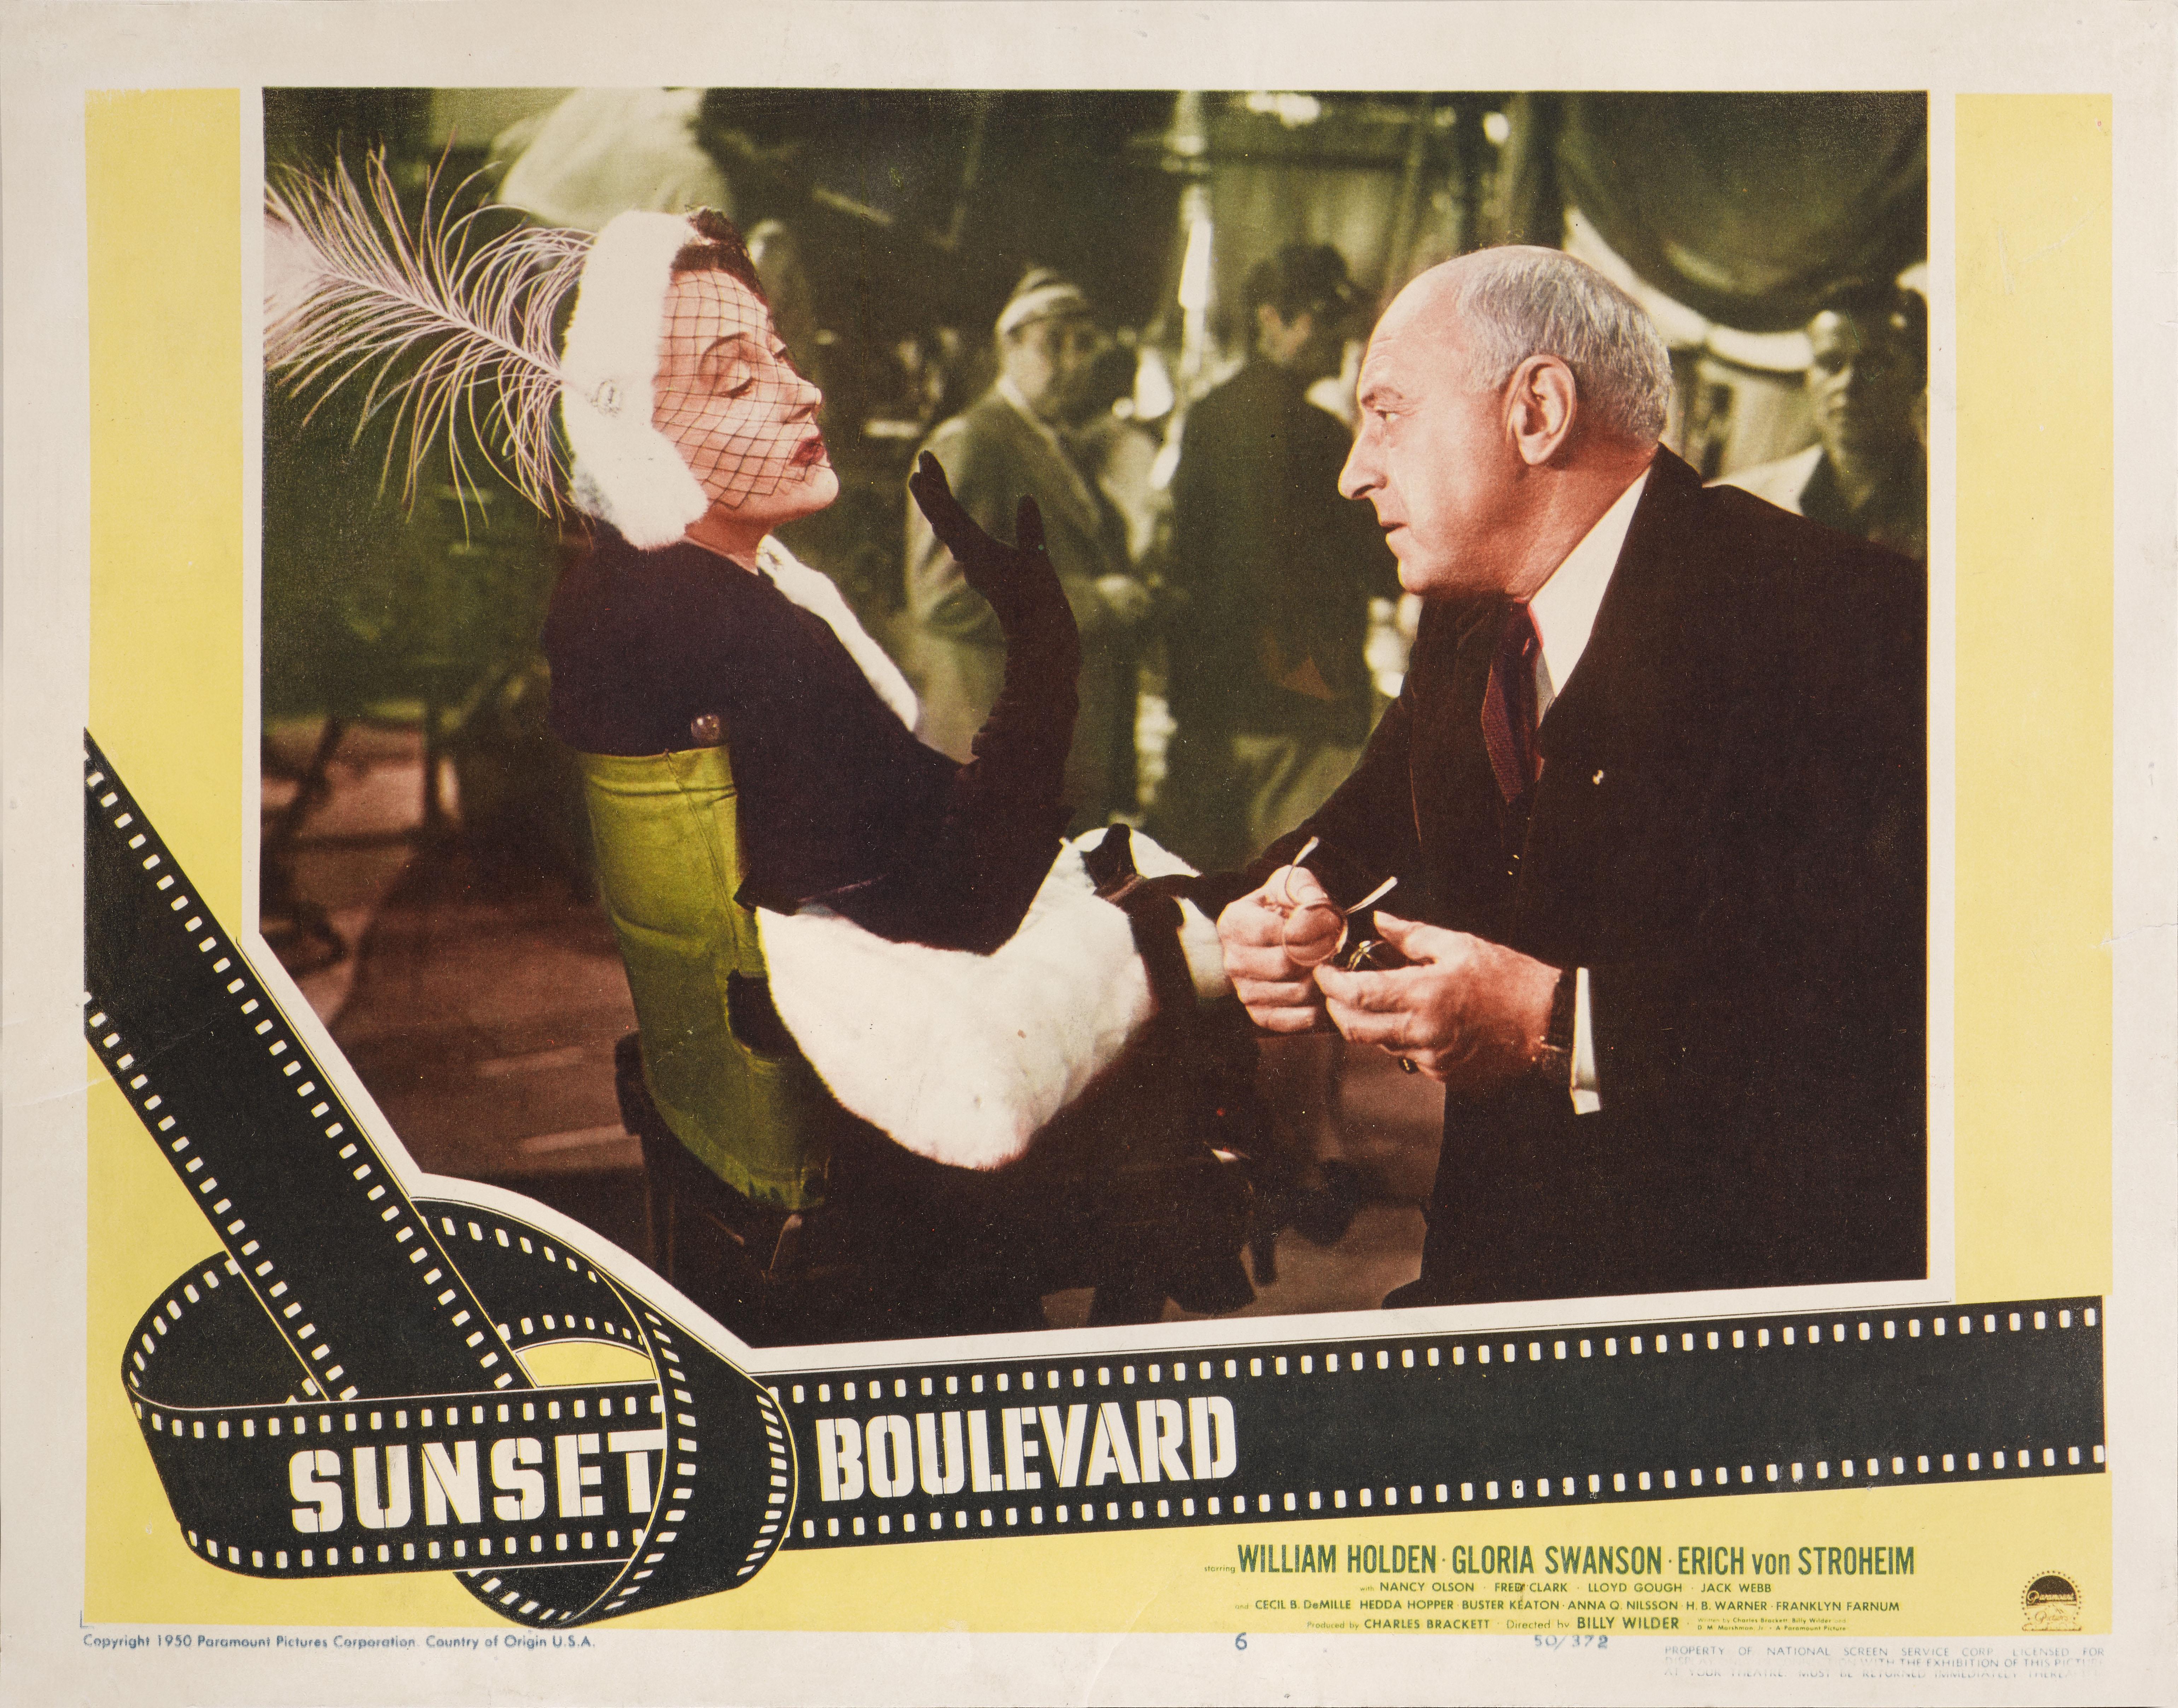 Original US lobby card number 6 for the American film noir directed and co-written by Billy Wilder, and produced and co-written by Charles Brackett. The film stars William Holden, Gloria Swanson and Errich von Stroheim. The film was nominated for